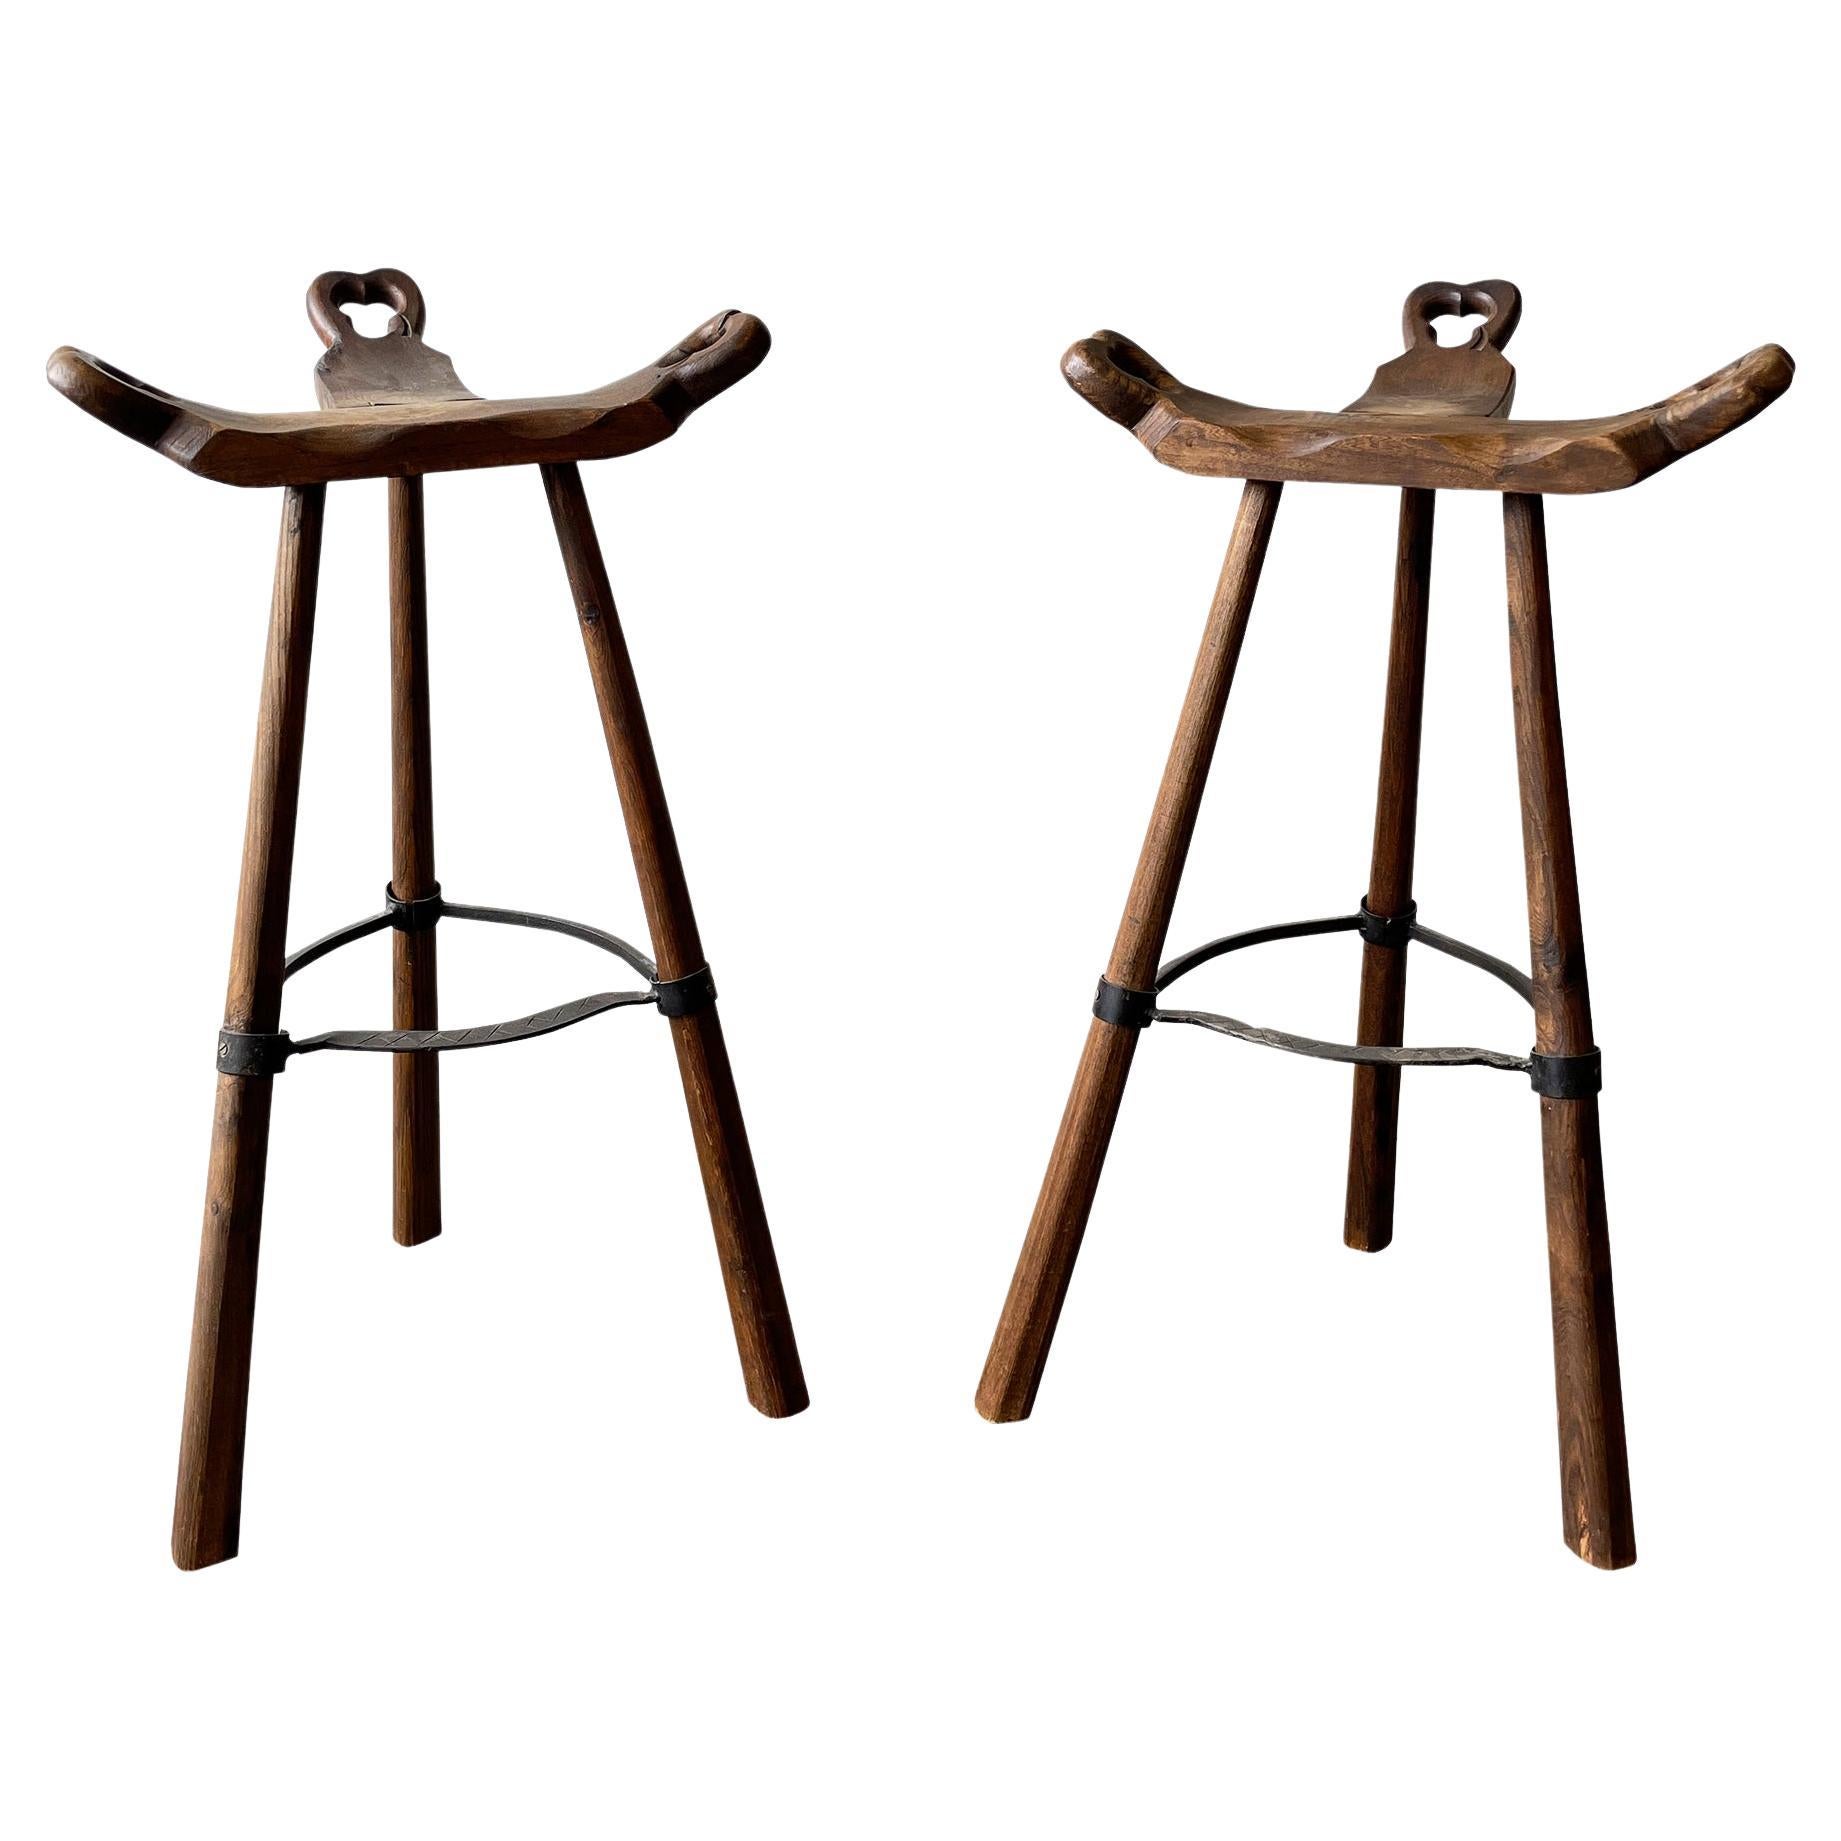 Pair of Primitive Carved Wood “Birthing” Bar Stools